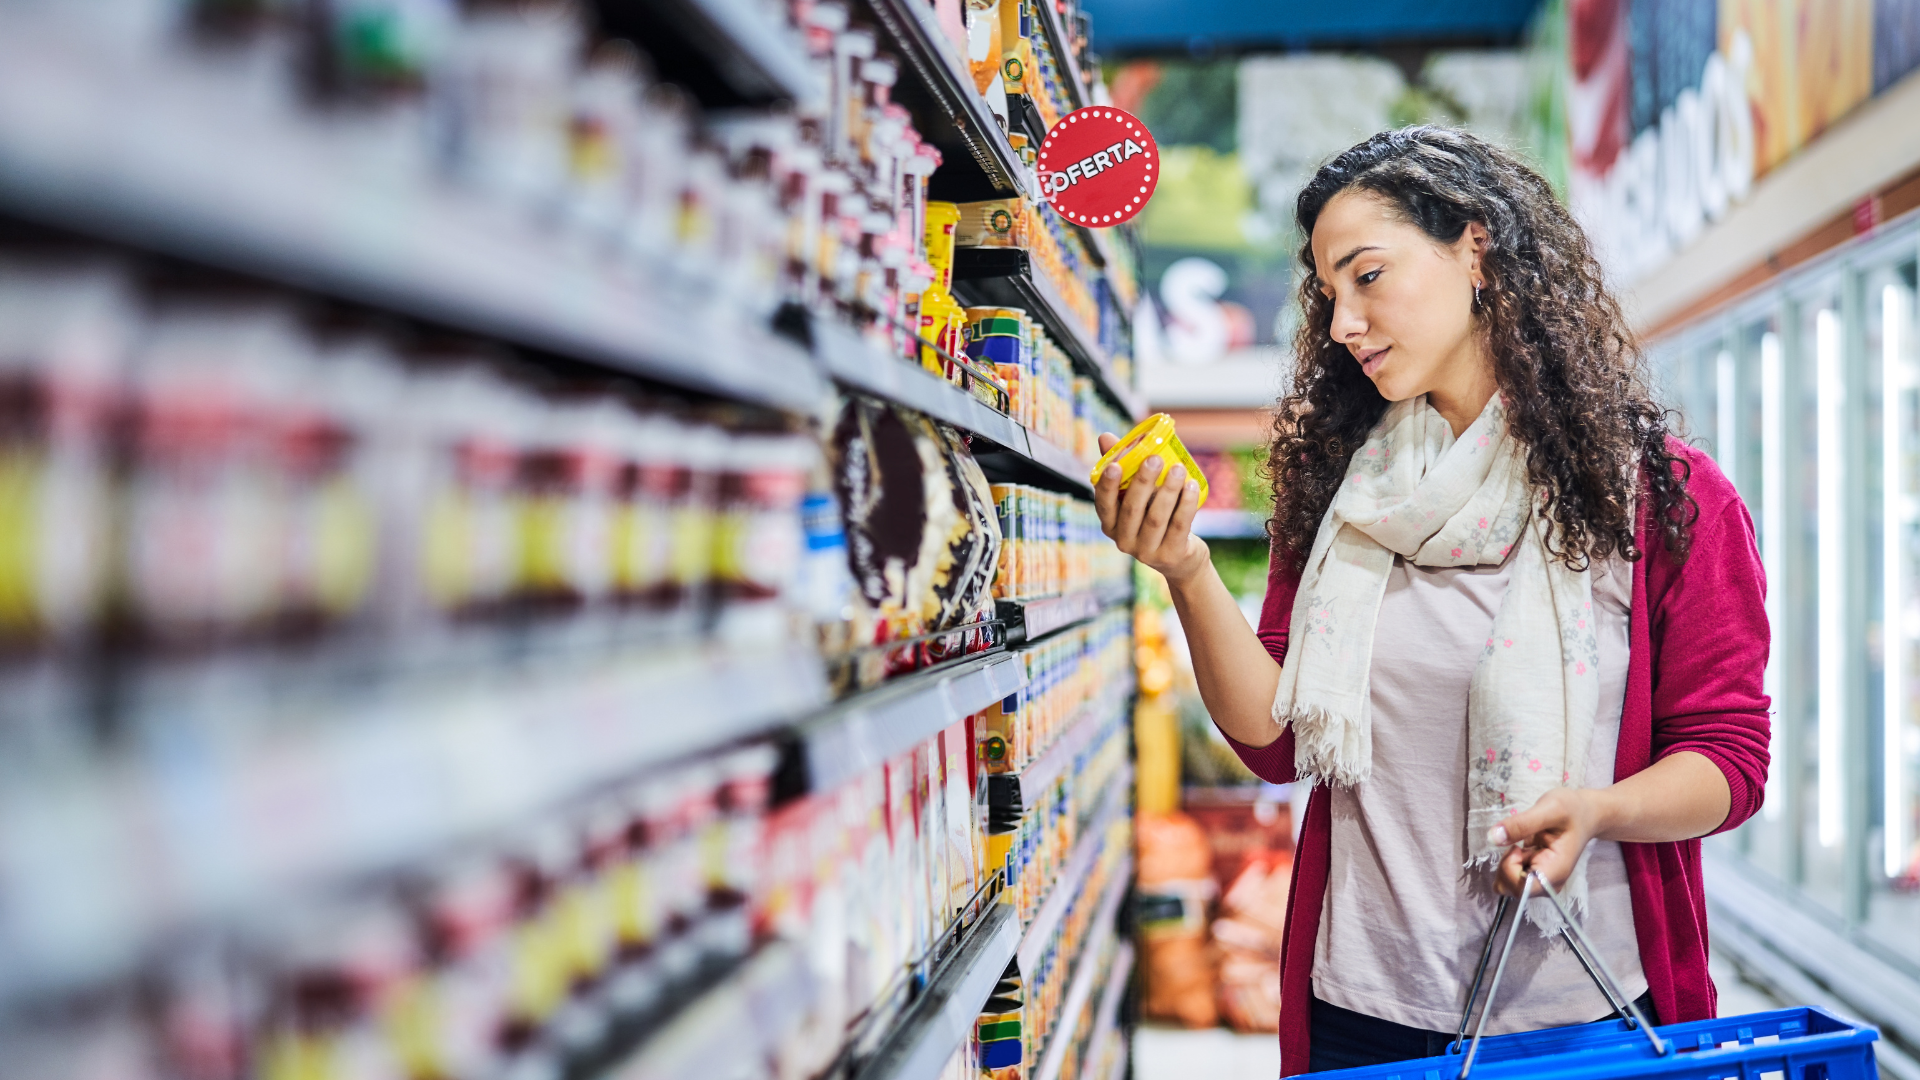 
Woman looking at product off the shelf